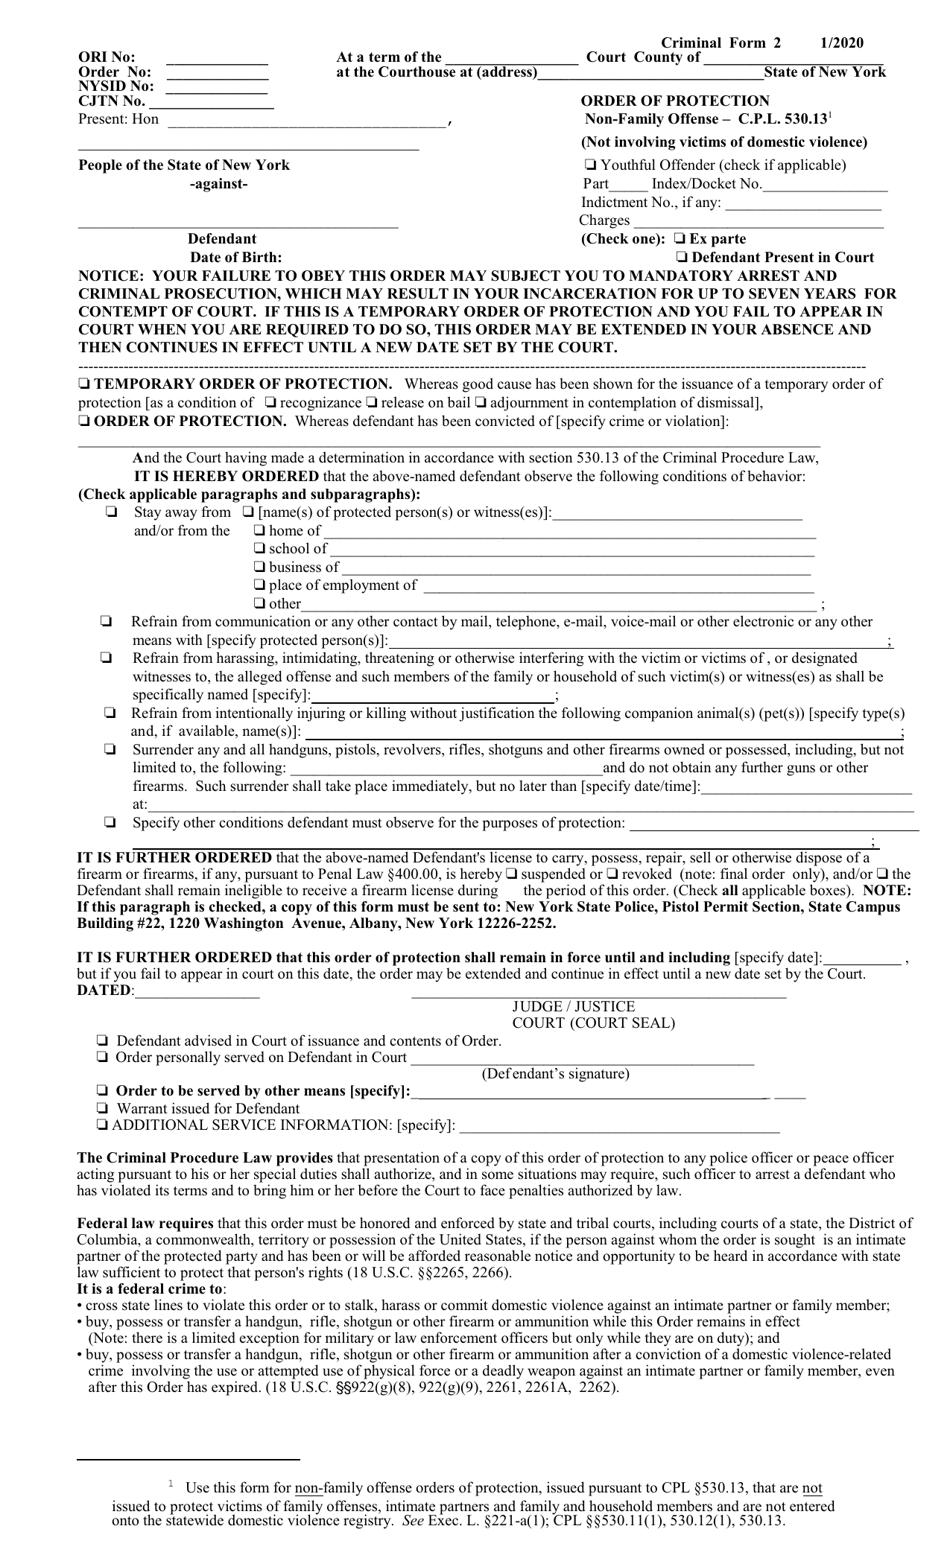 Criminal Form 2 Order of Protection / Non-family Offense - New York, Page 1